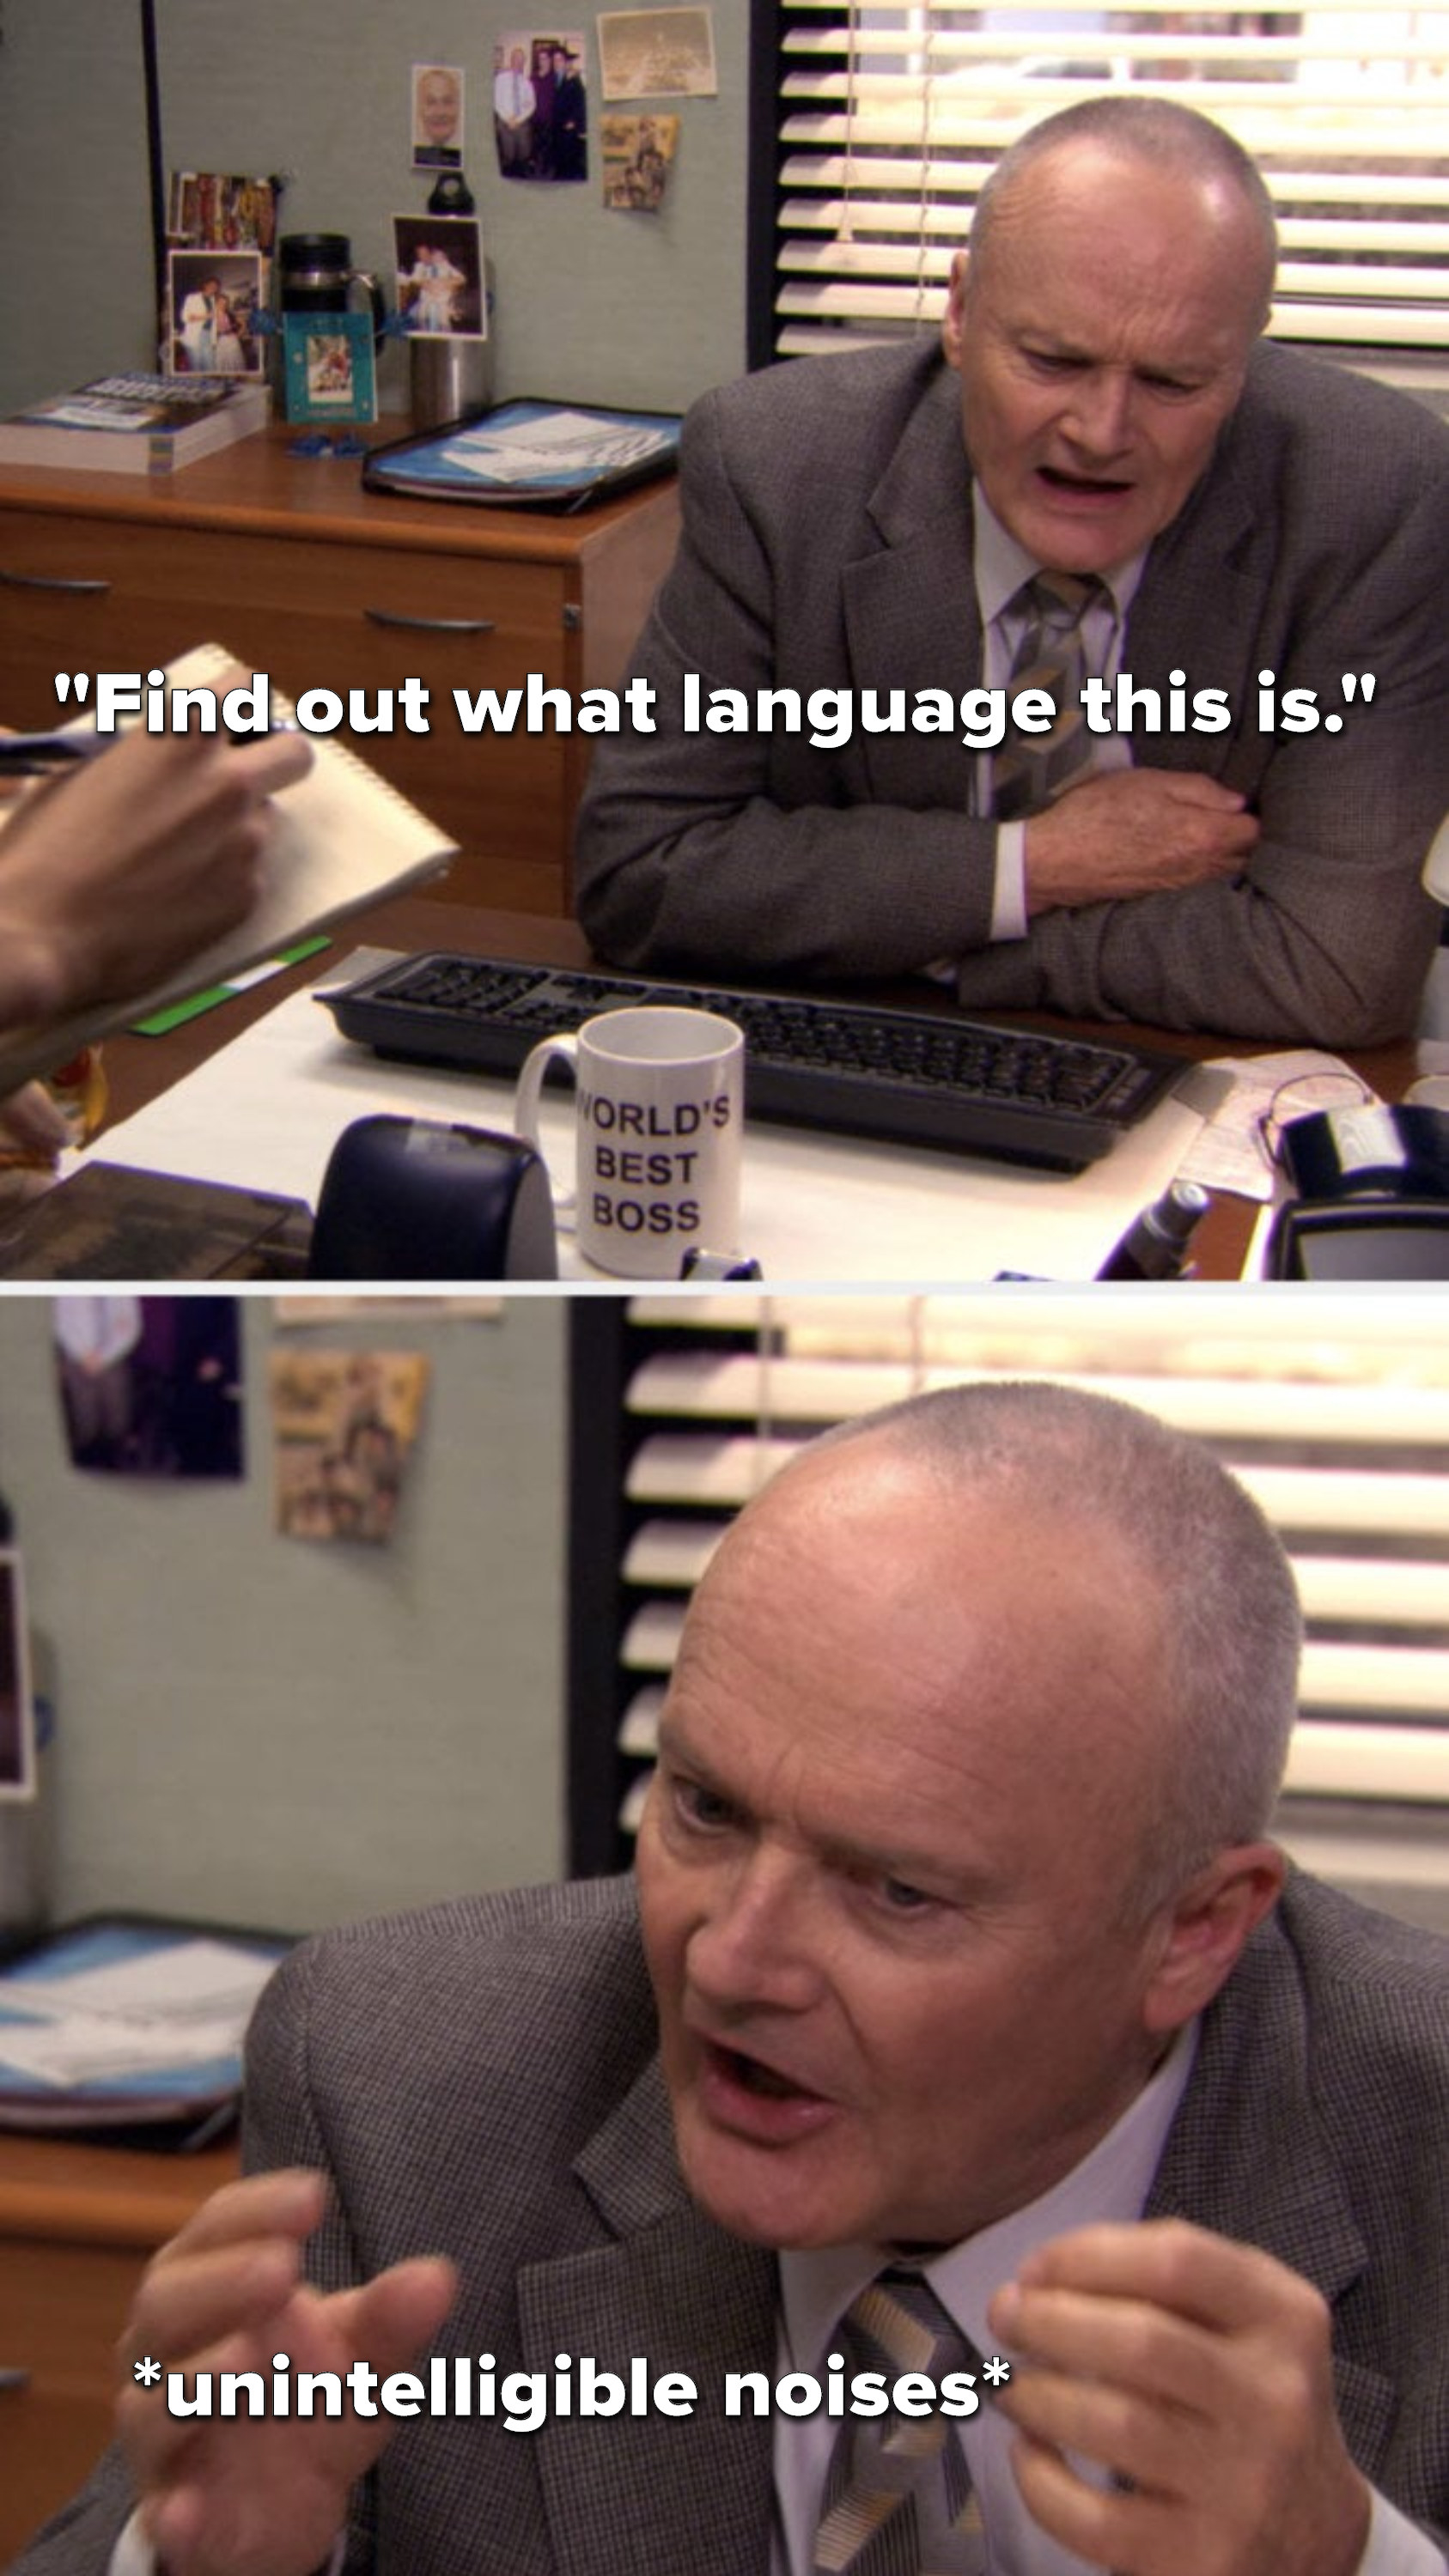 Creed says, &quot;Find out what language this is&quot; and then makes unintelligible noises